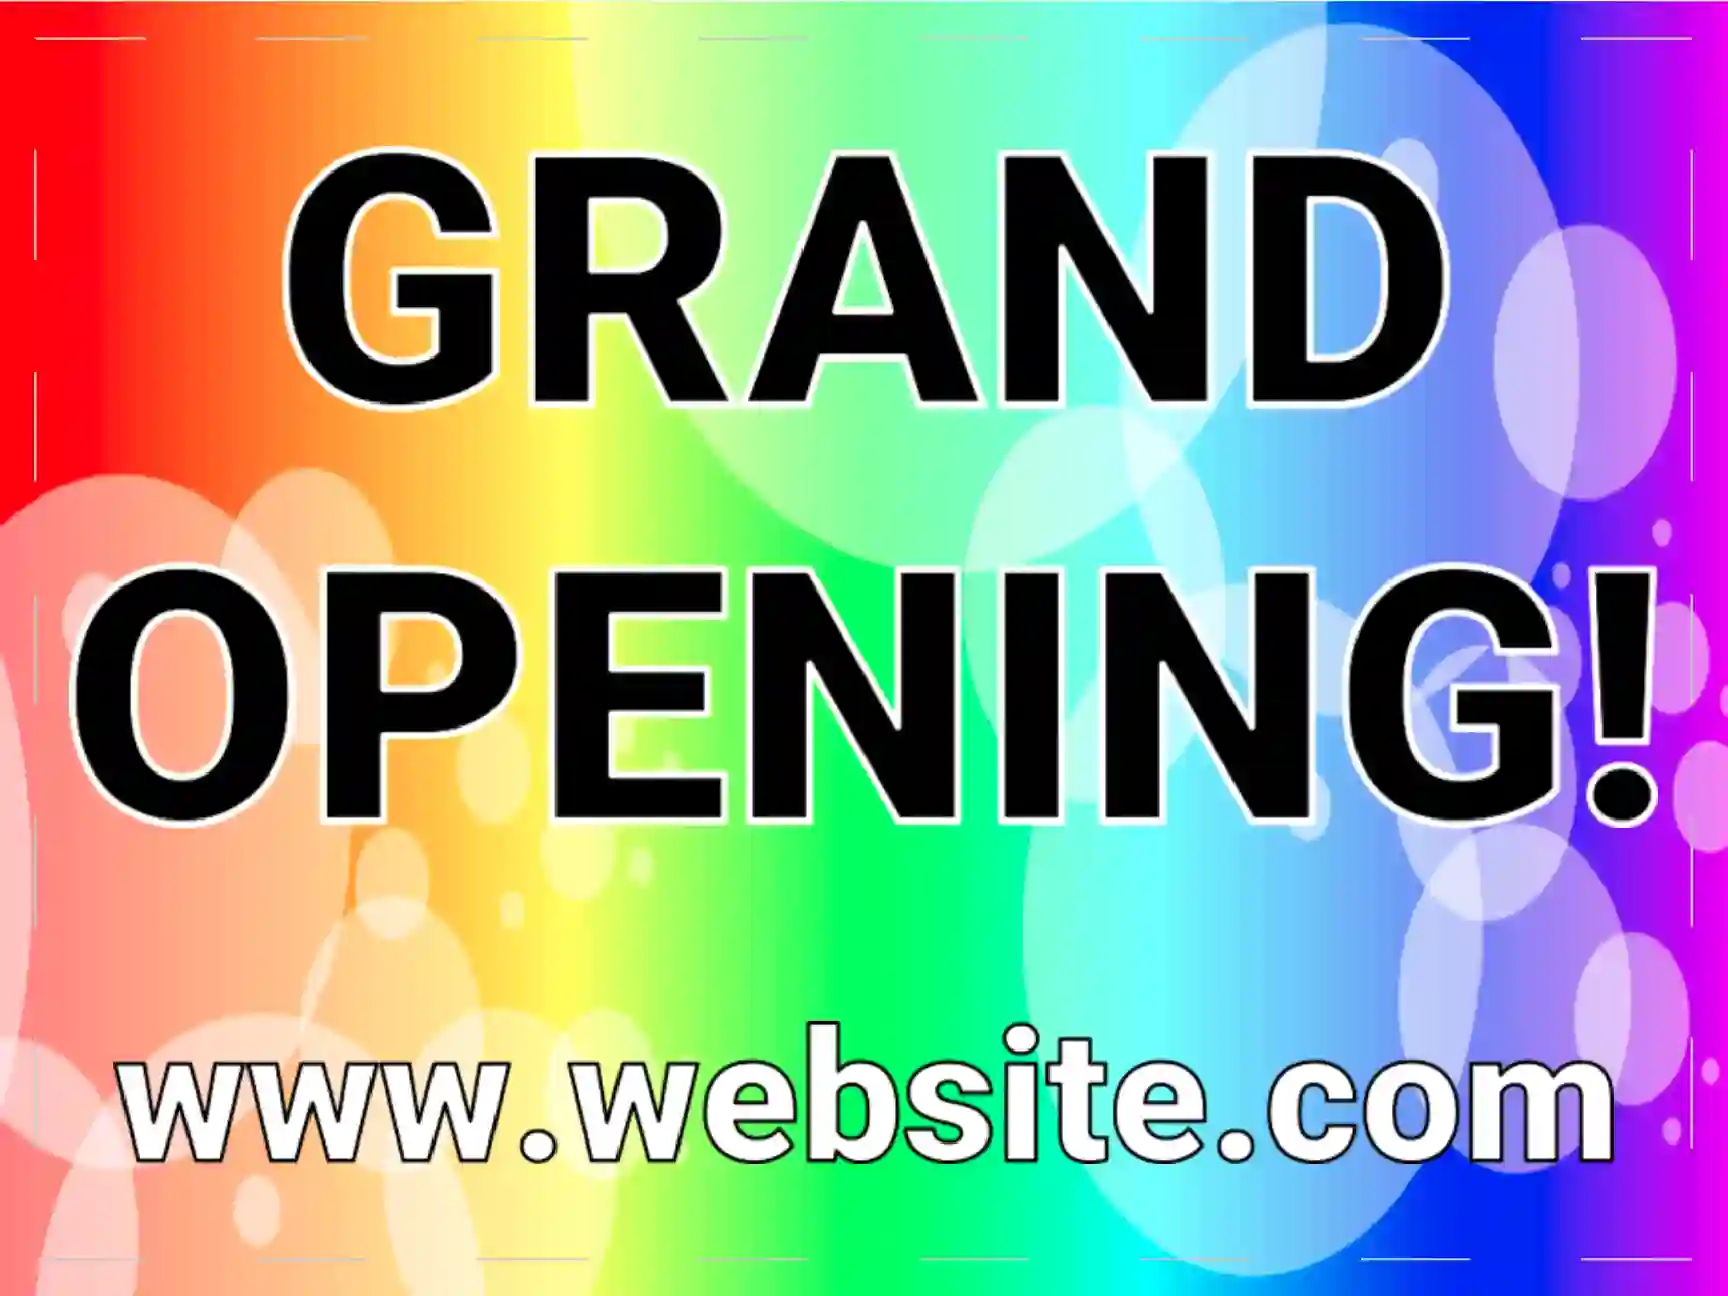 grand opening yard sign with rainbow and bubbly background